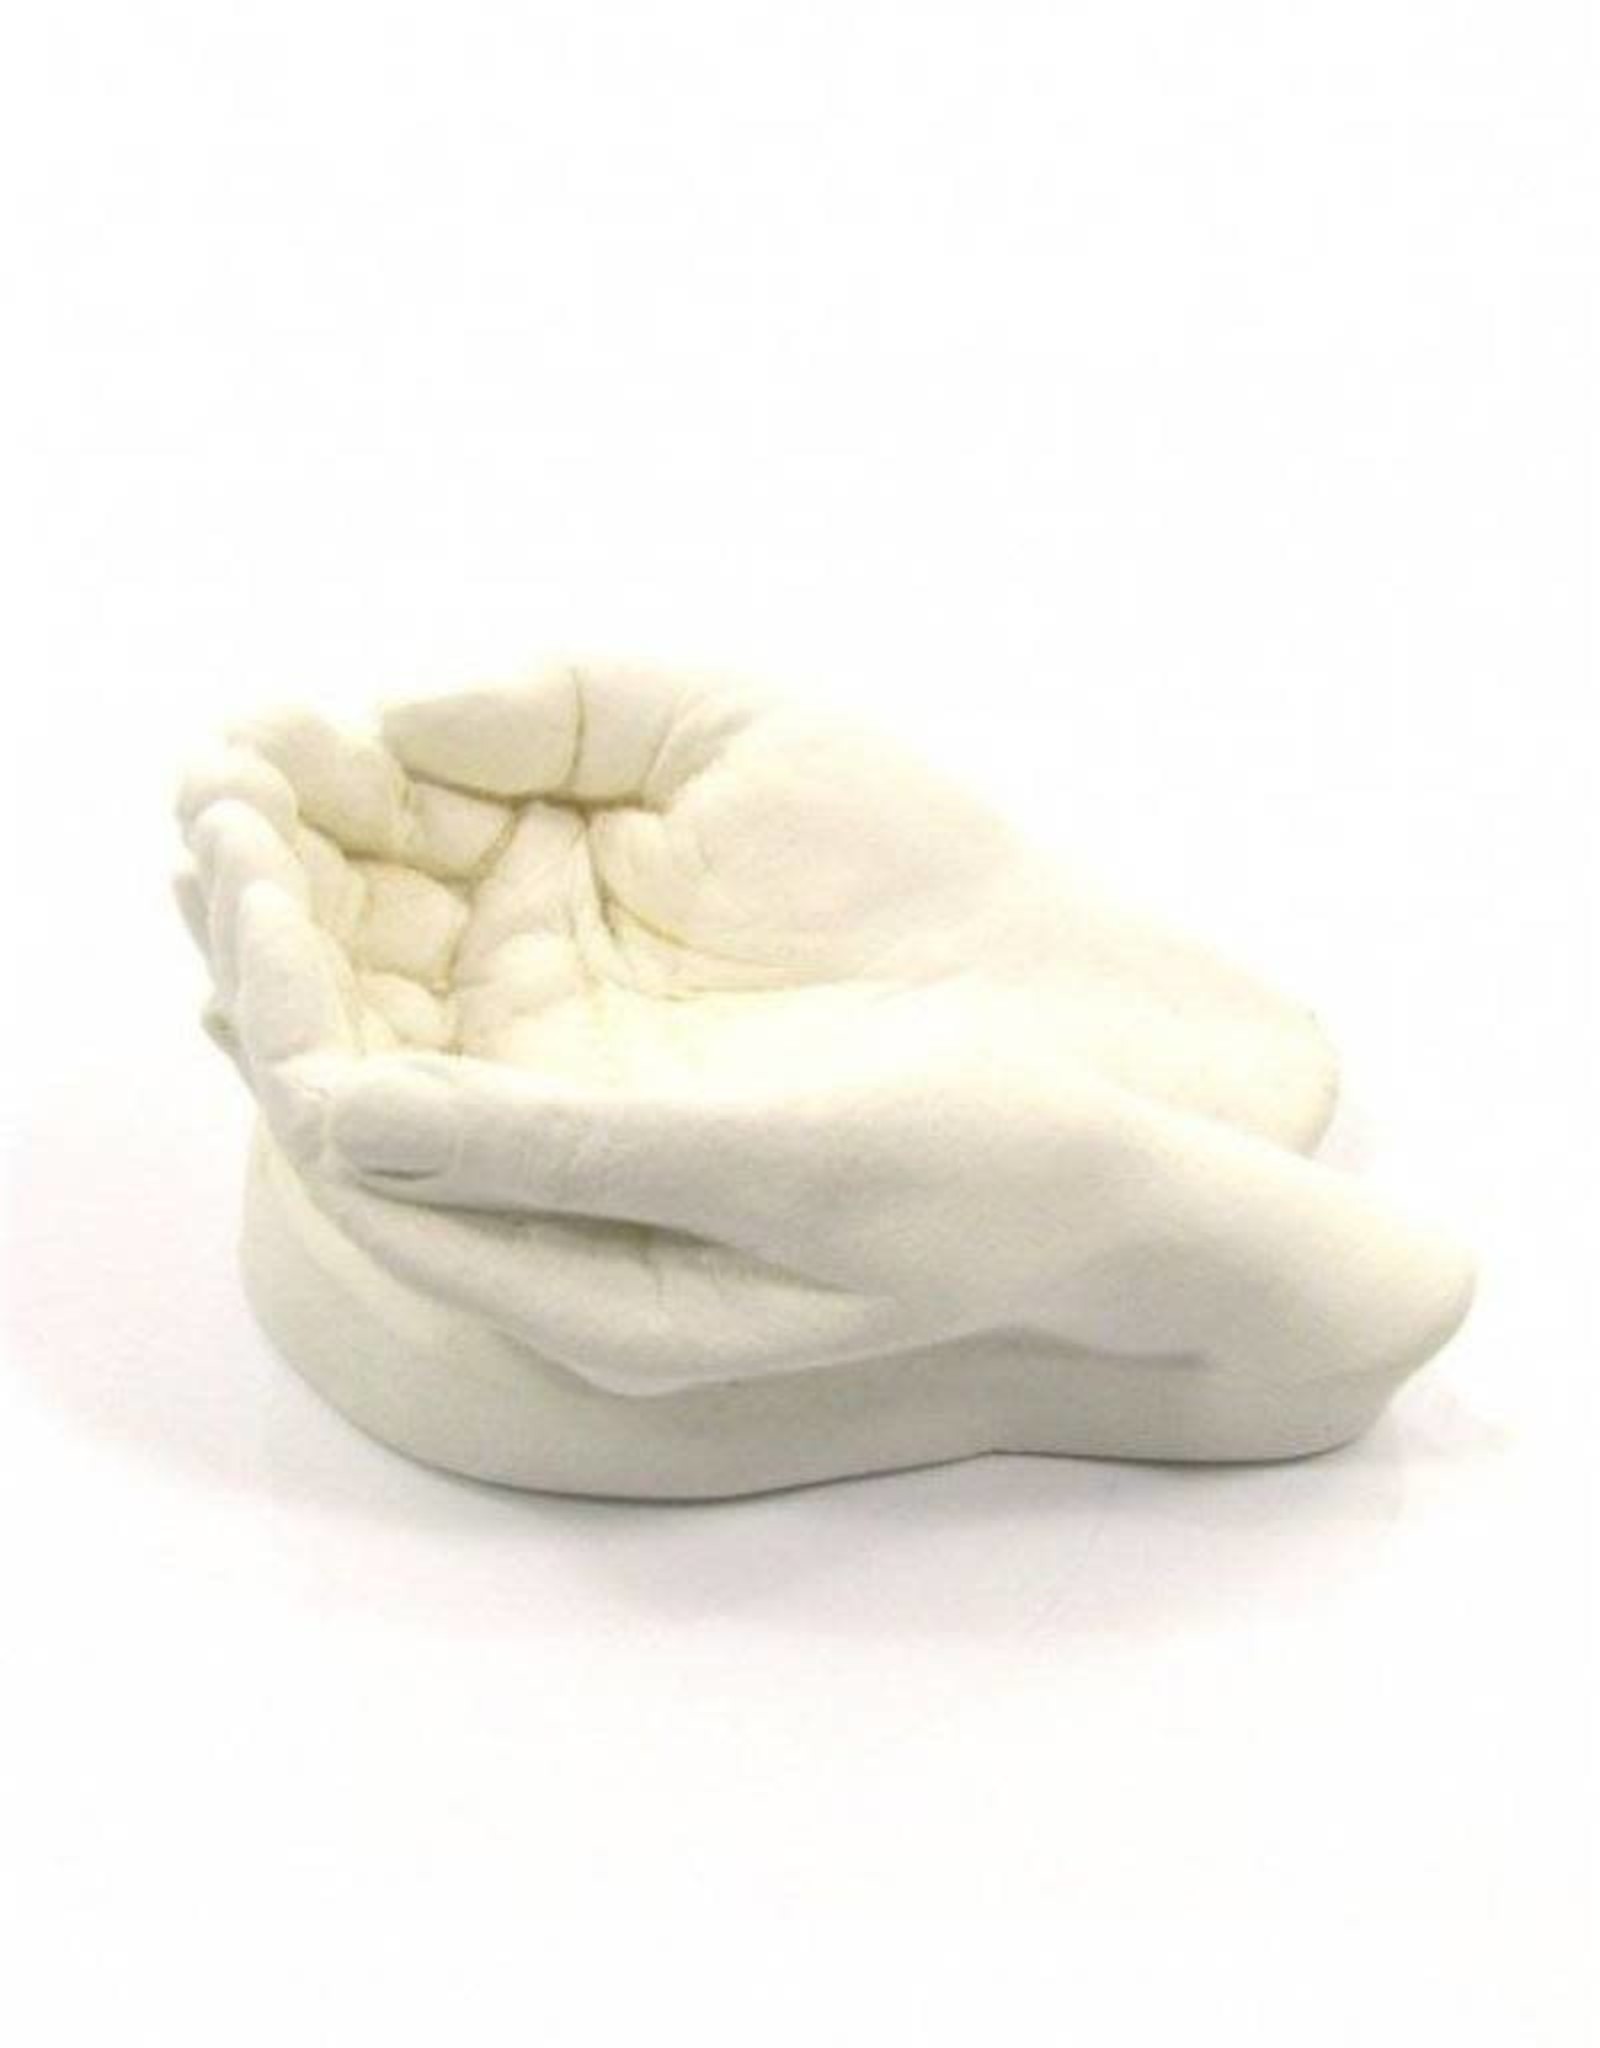 God's Hands Small - 2" x  3" Statue